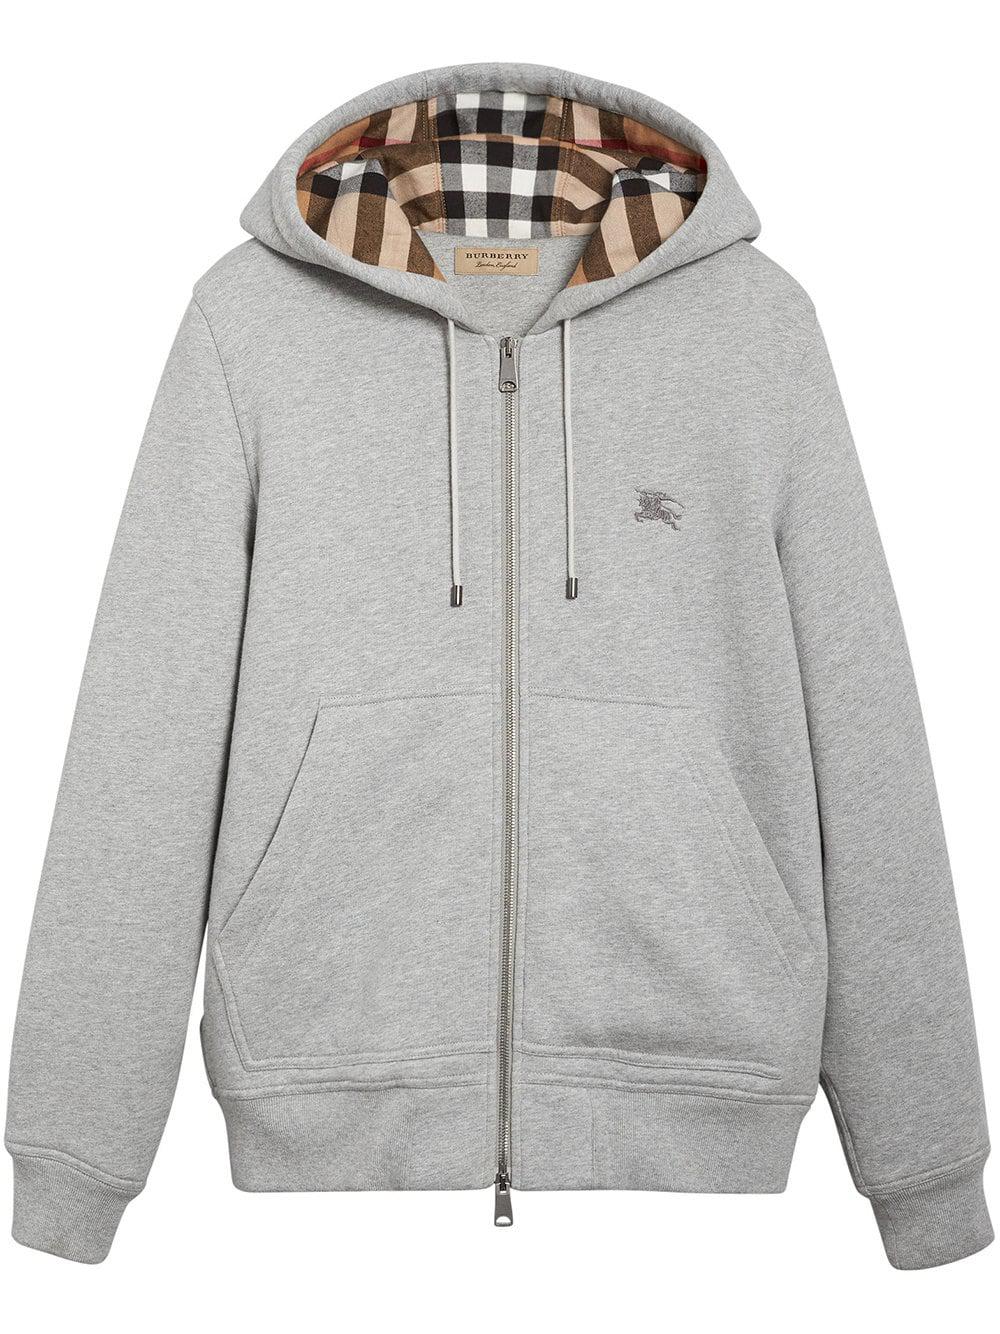 Burberry Cotton Check Detail Hooded Sweatshirt in Pale Grey Melange (Gray)  for Men | Lyst